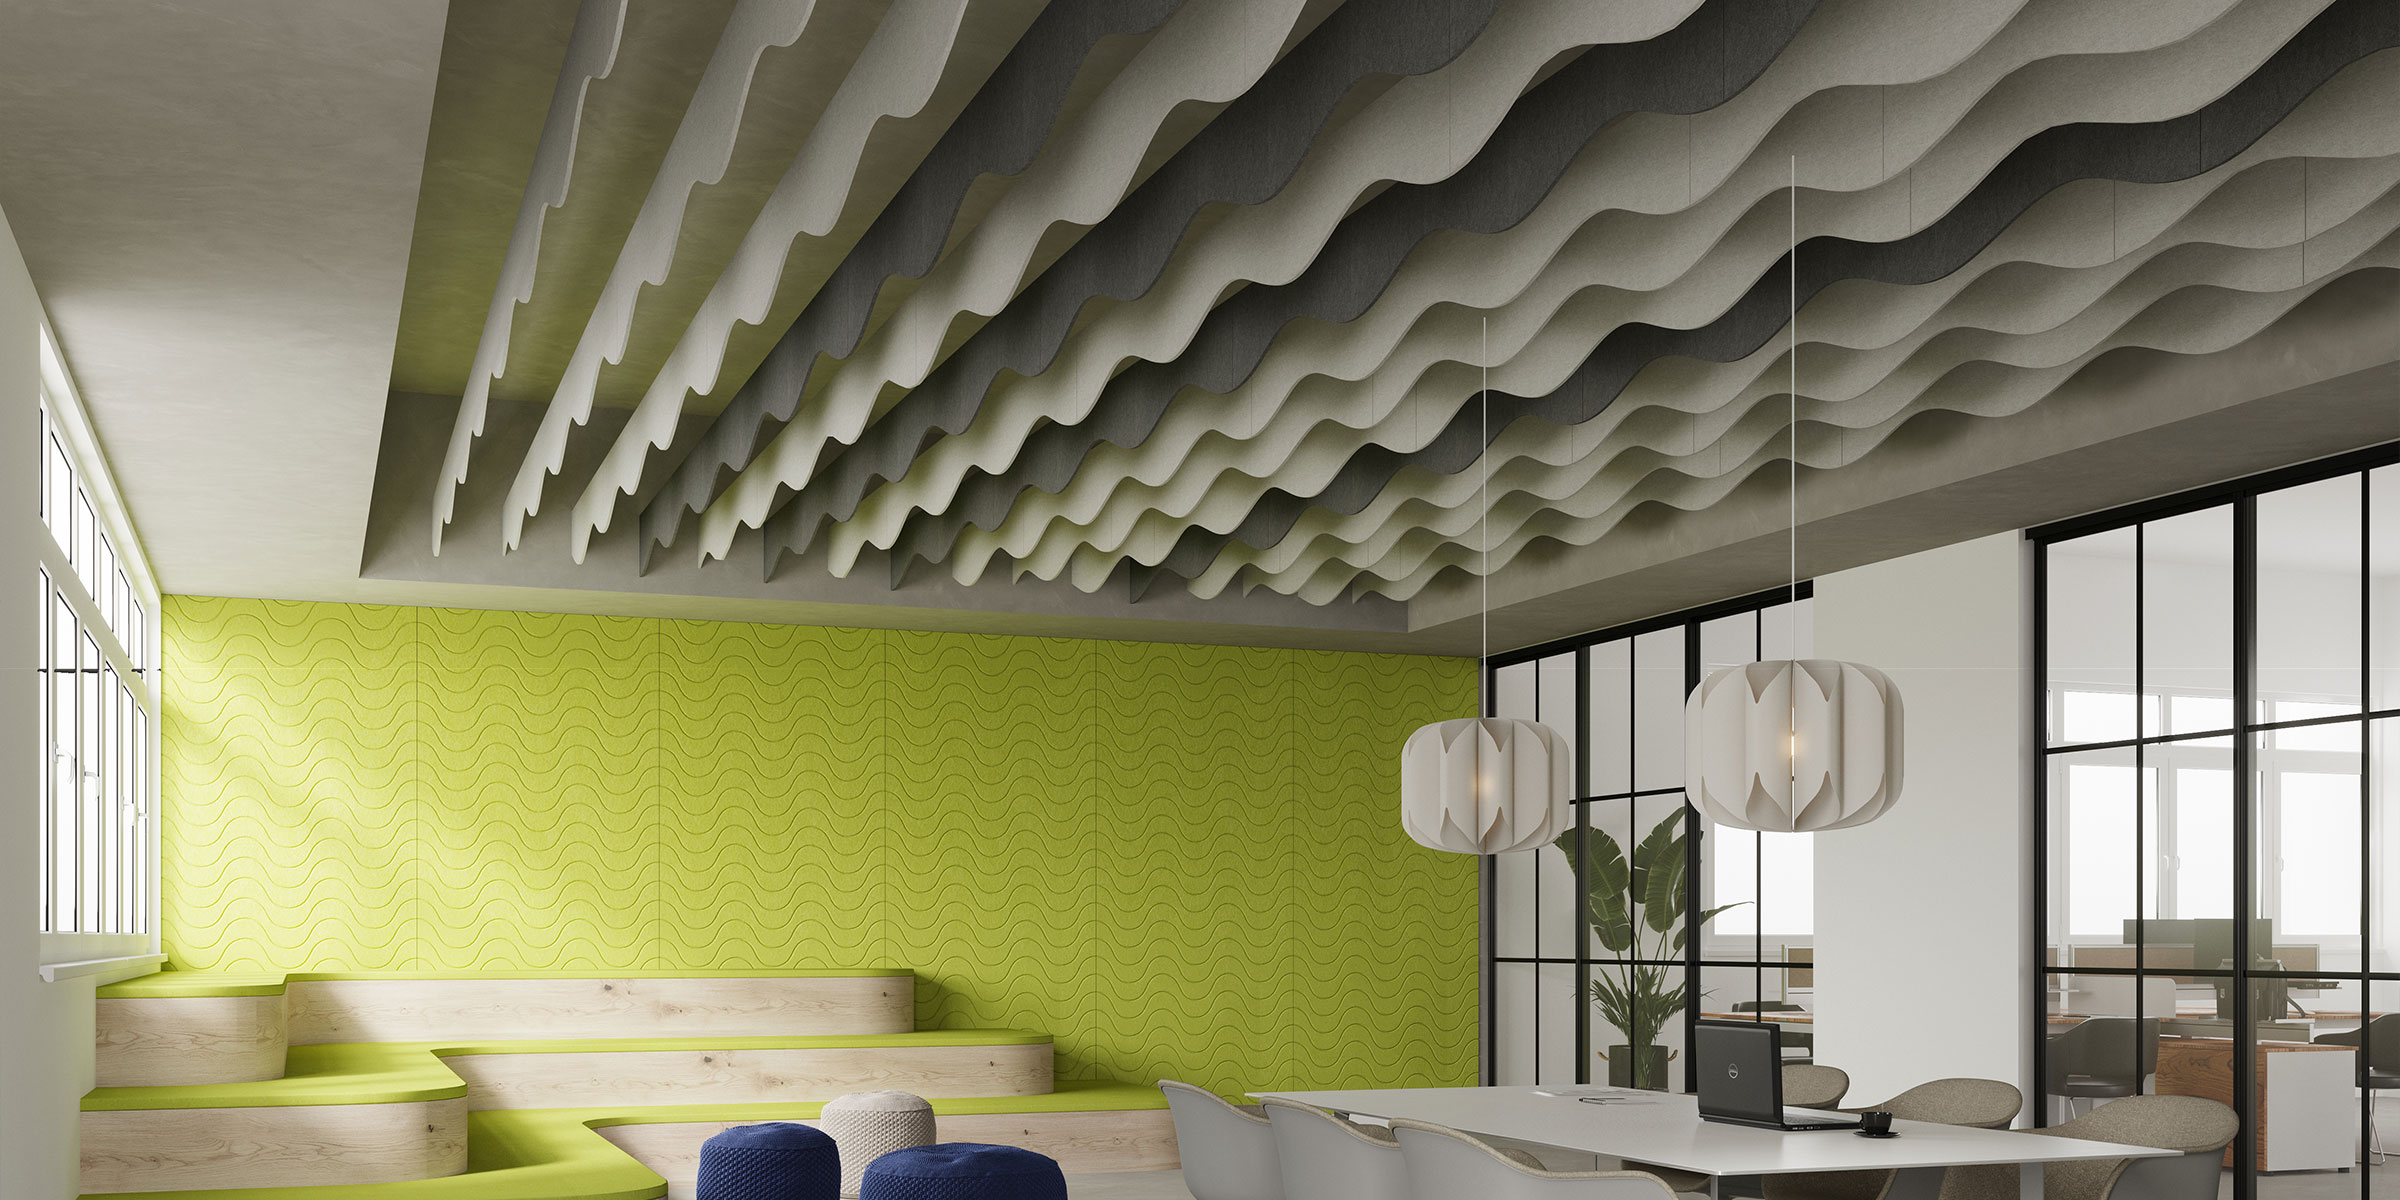 Everything you need to know about Acoustic Ceilings - Dream team Promos